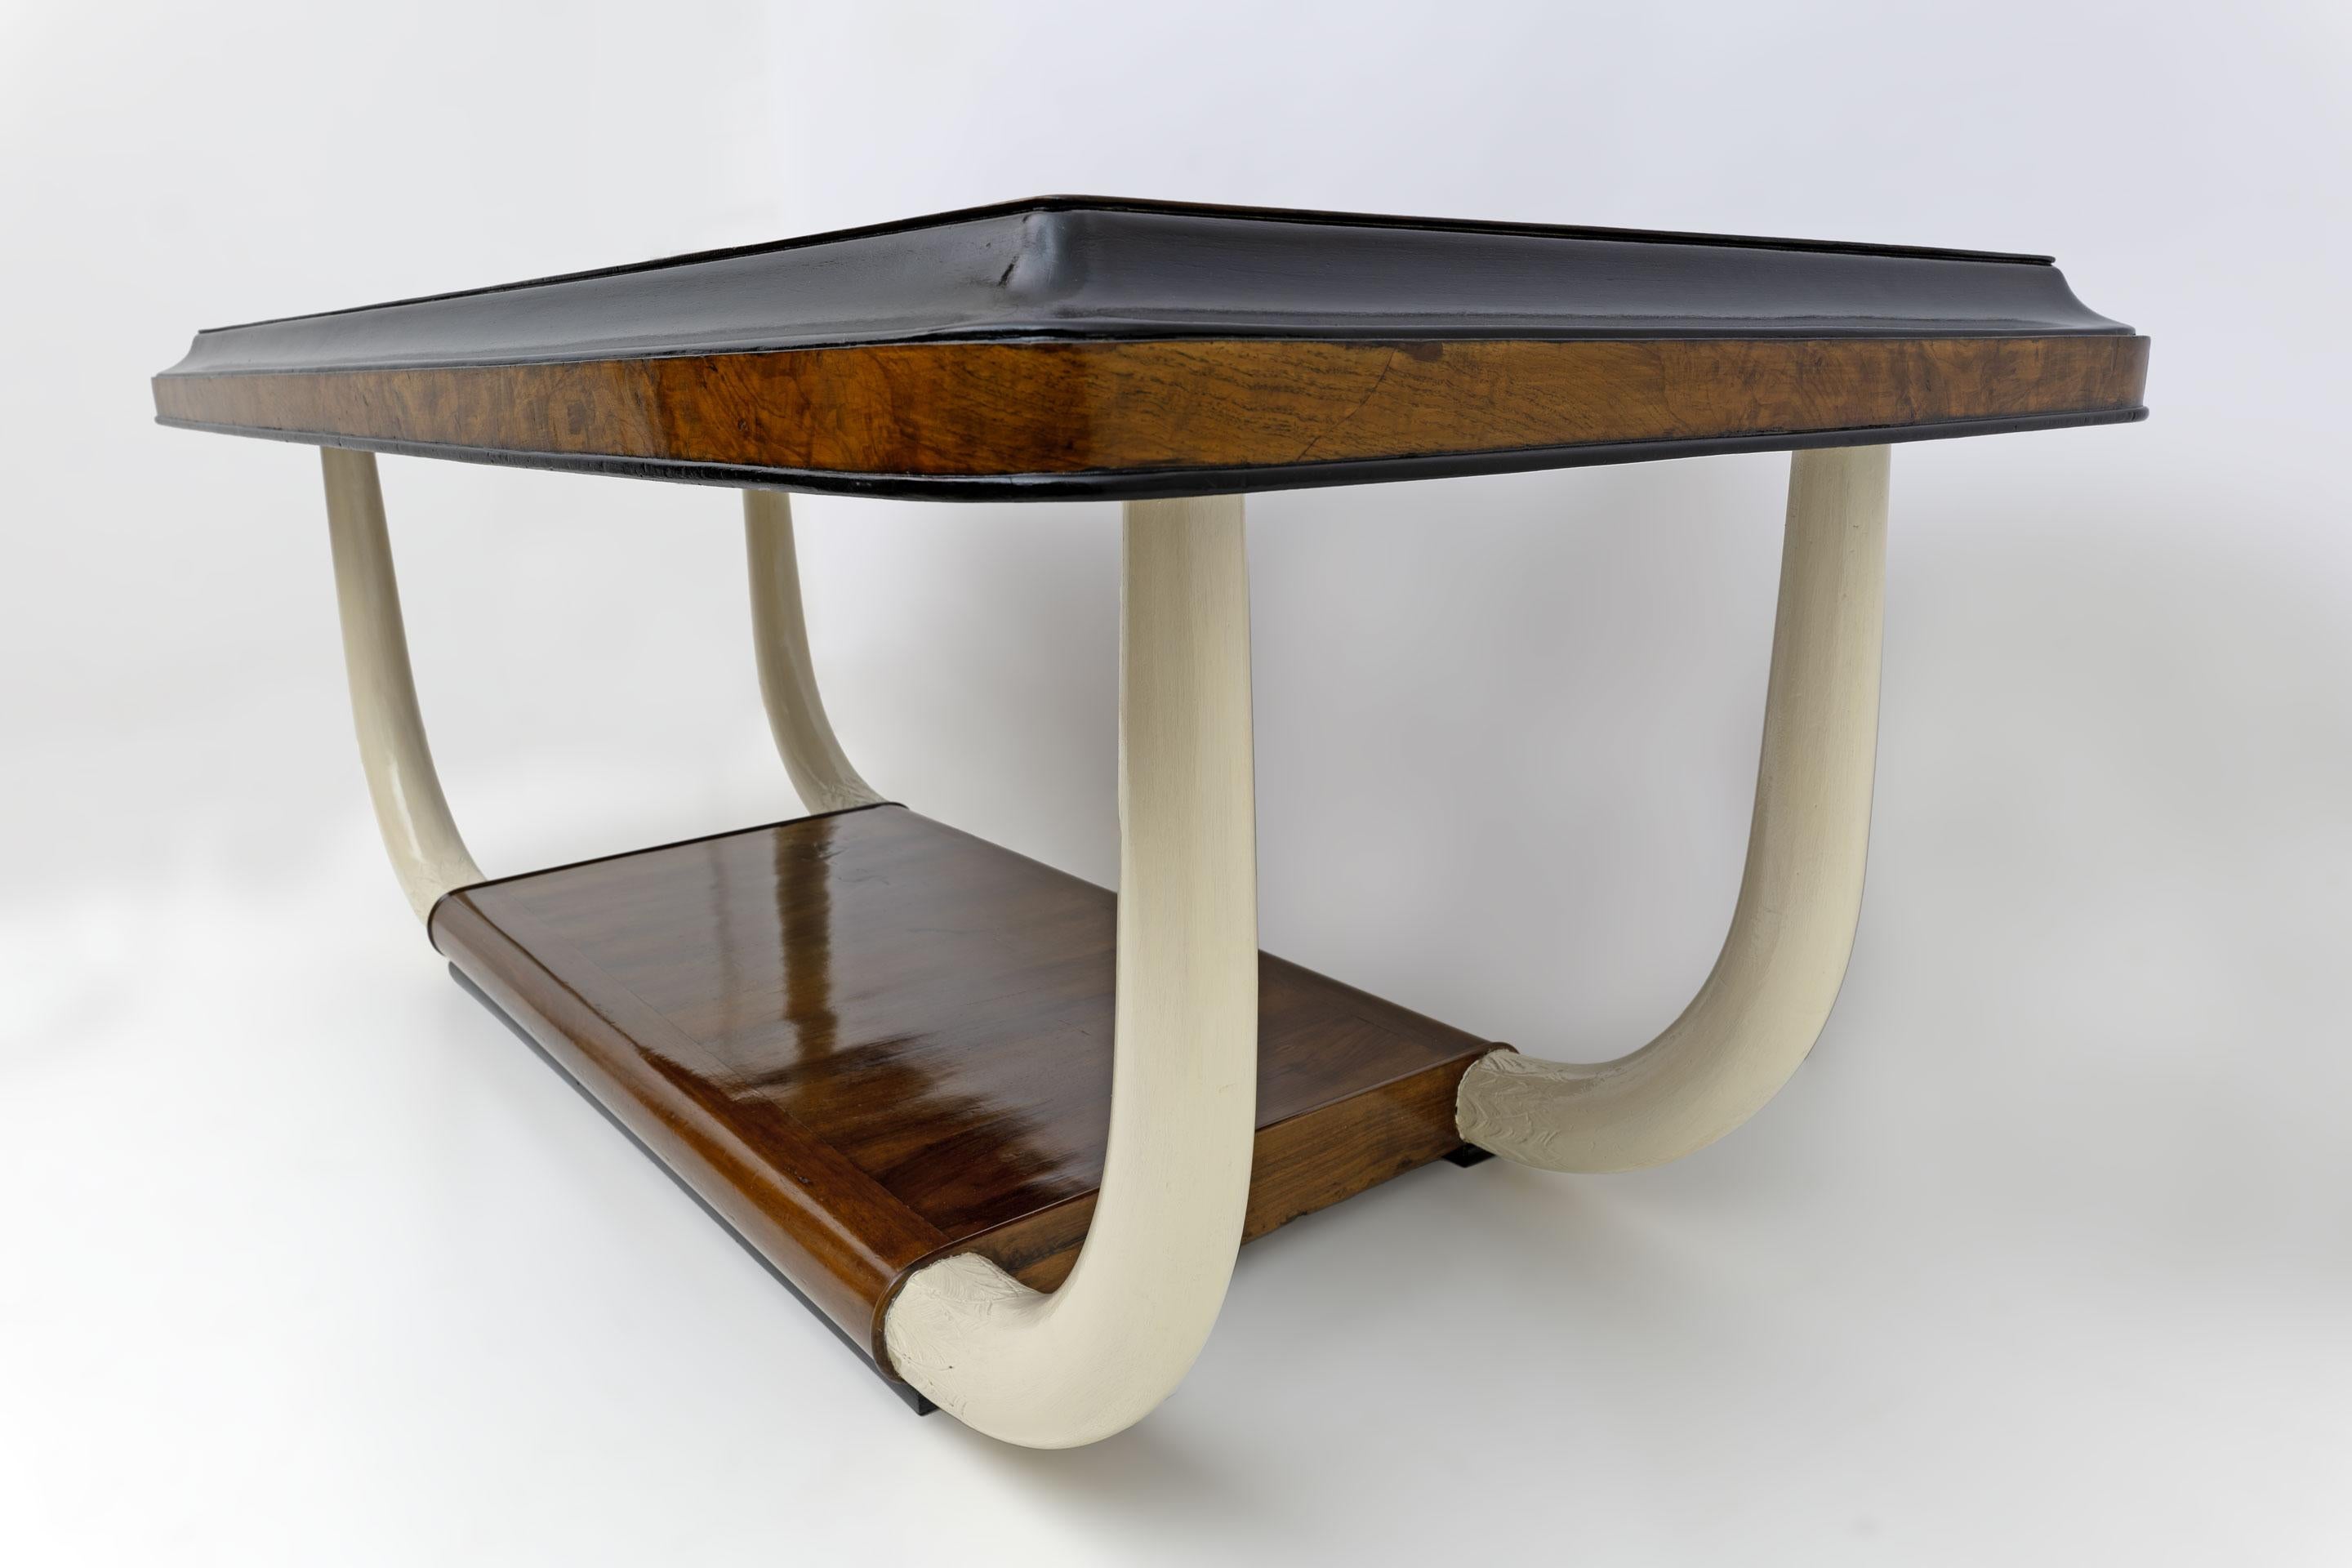 Art Deco style table or desk, produced in the colonial period, as confirmed by the legs in the shape of elephant tusks in ivory lacquered wood. Top in black glass, walnut root and ebonized wood. Completely restored and shellac polished.